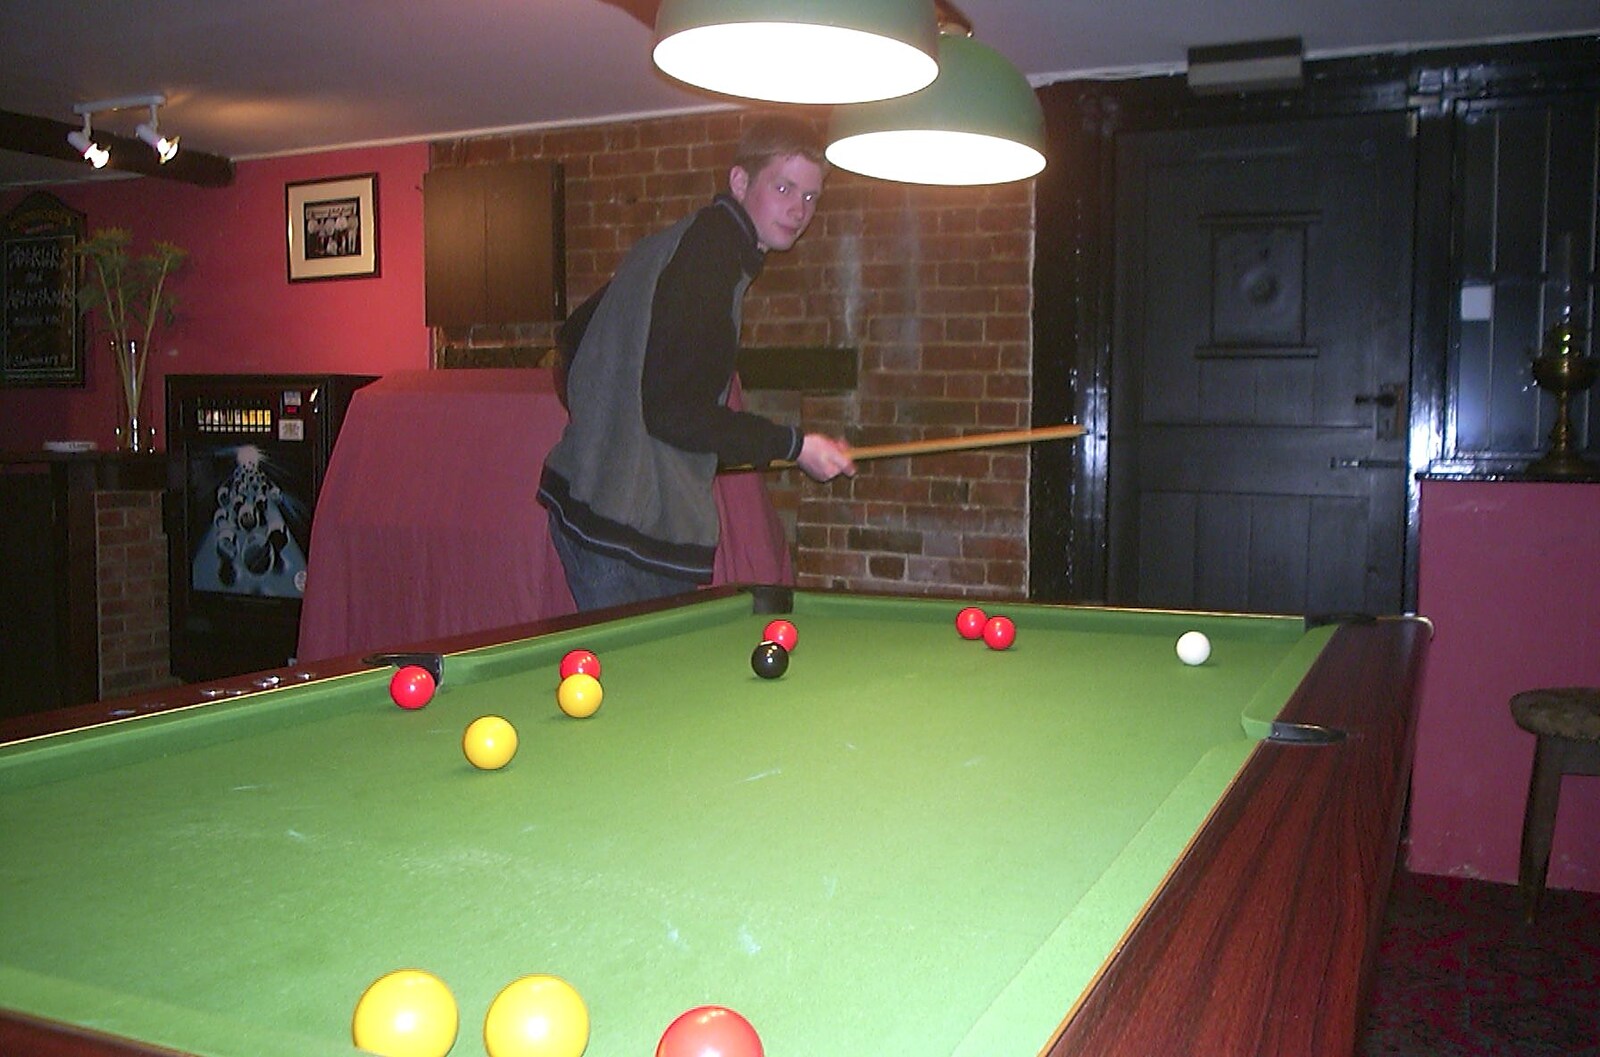 A March Miscellany: The BBs, Pulham Pubs and Broken Cars - Norfolk and Cambridgeshire, 31st March 2004: Phil does a bit of Stick Game